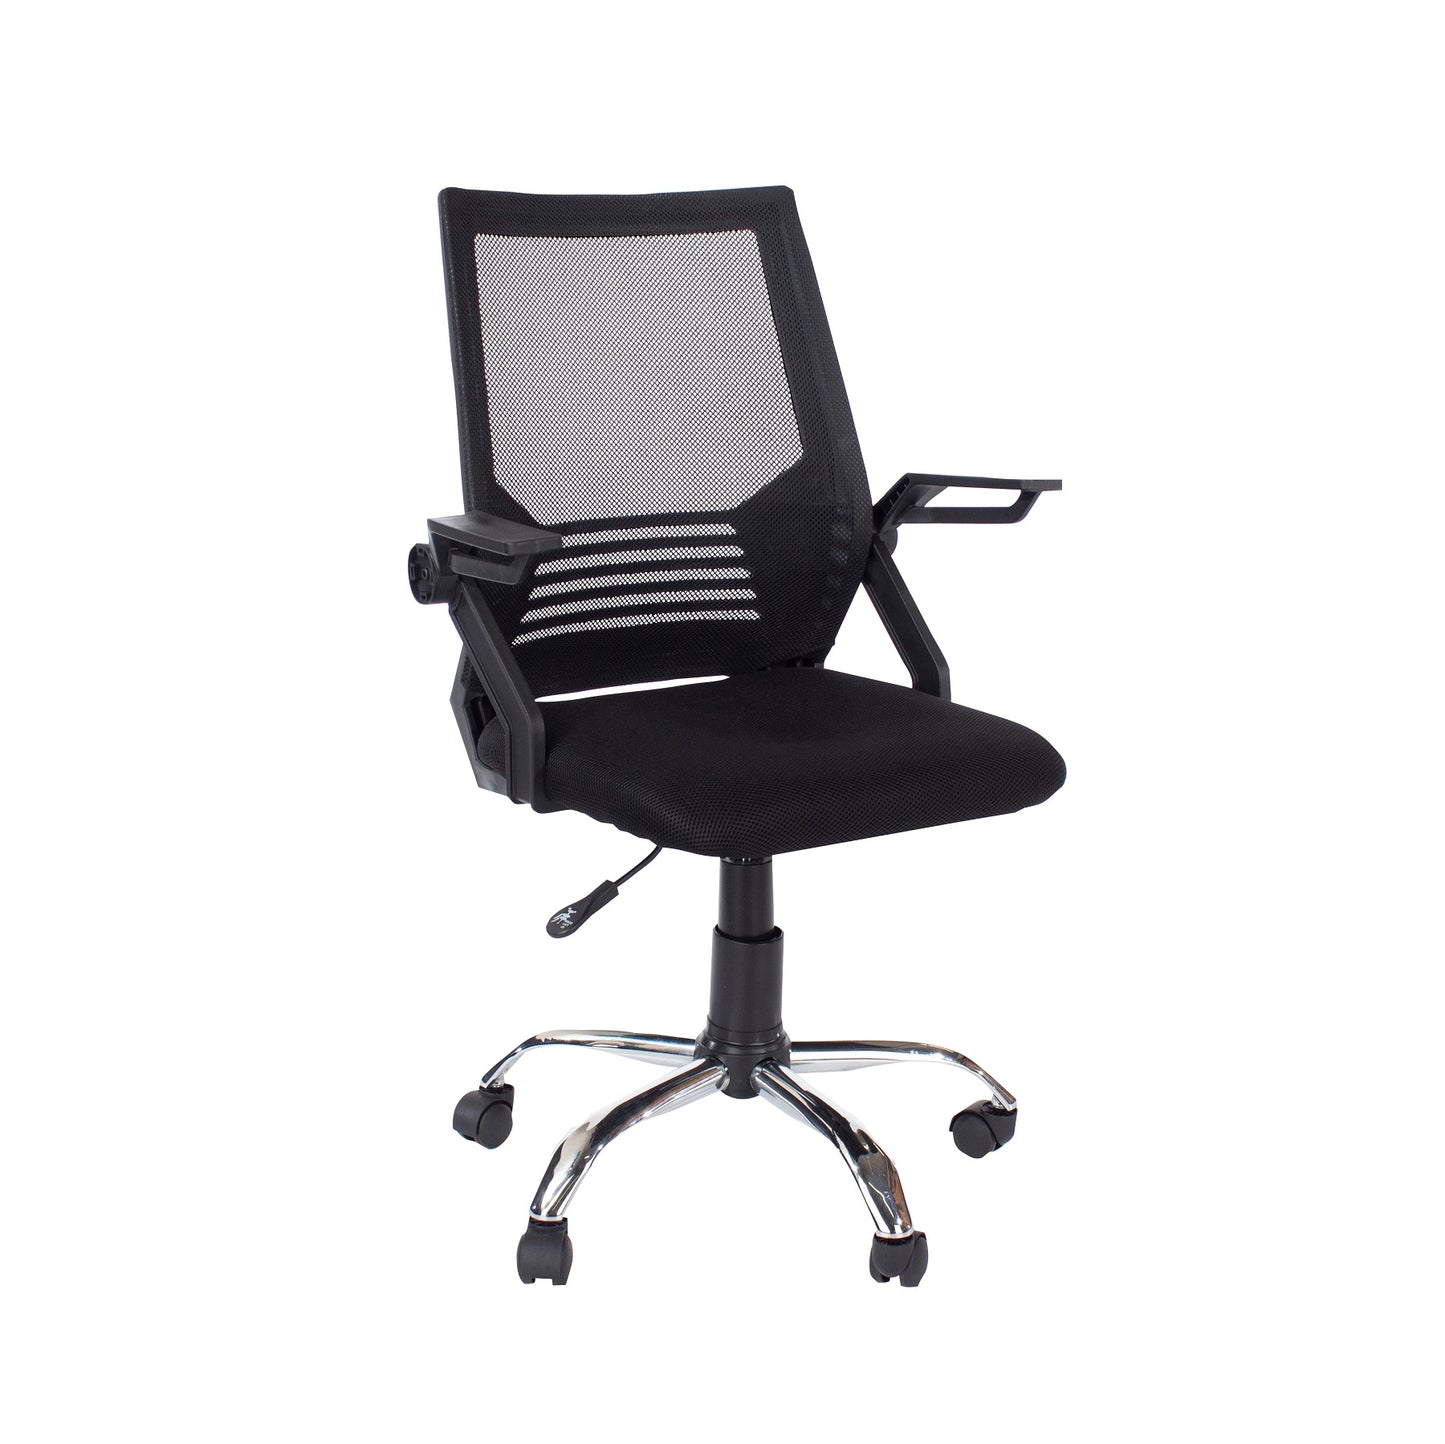 Loft Study Chair with Black Mesh Back & Fabric Seat